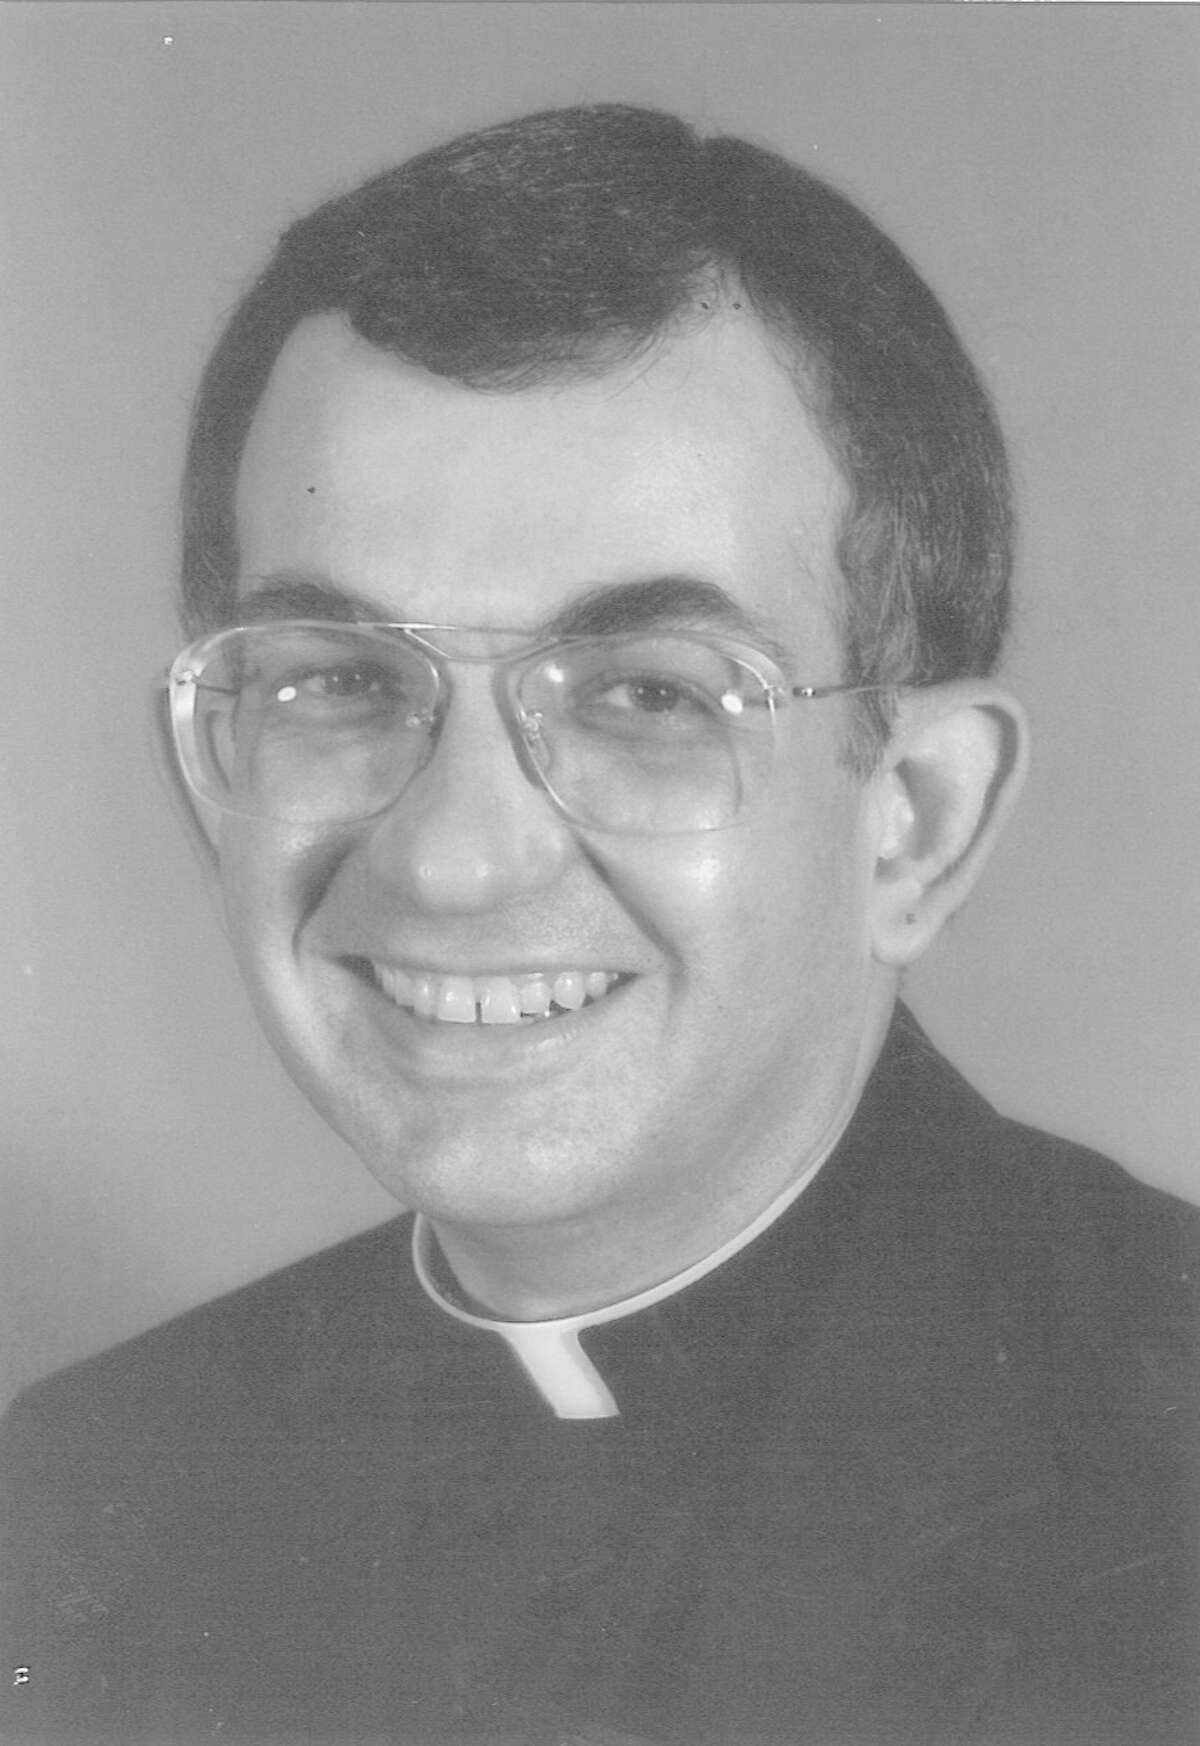 Msgr. Bennie J. Patillo, one of the first priests ordained for the Diocese of Beaumont, passed away Wednesday morning at the age of 80. Patillo is pictured above in a portrait taken in 1981.